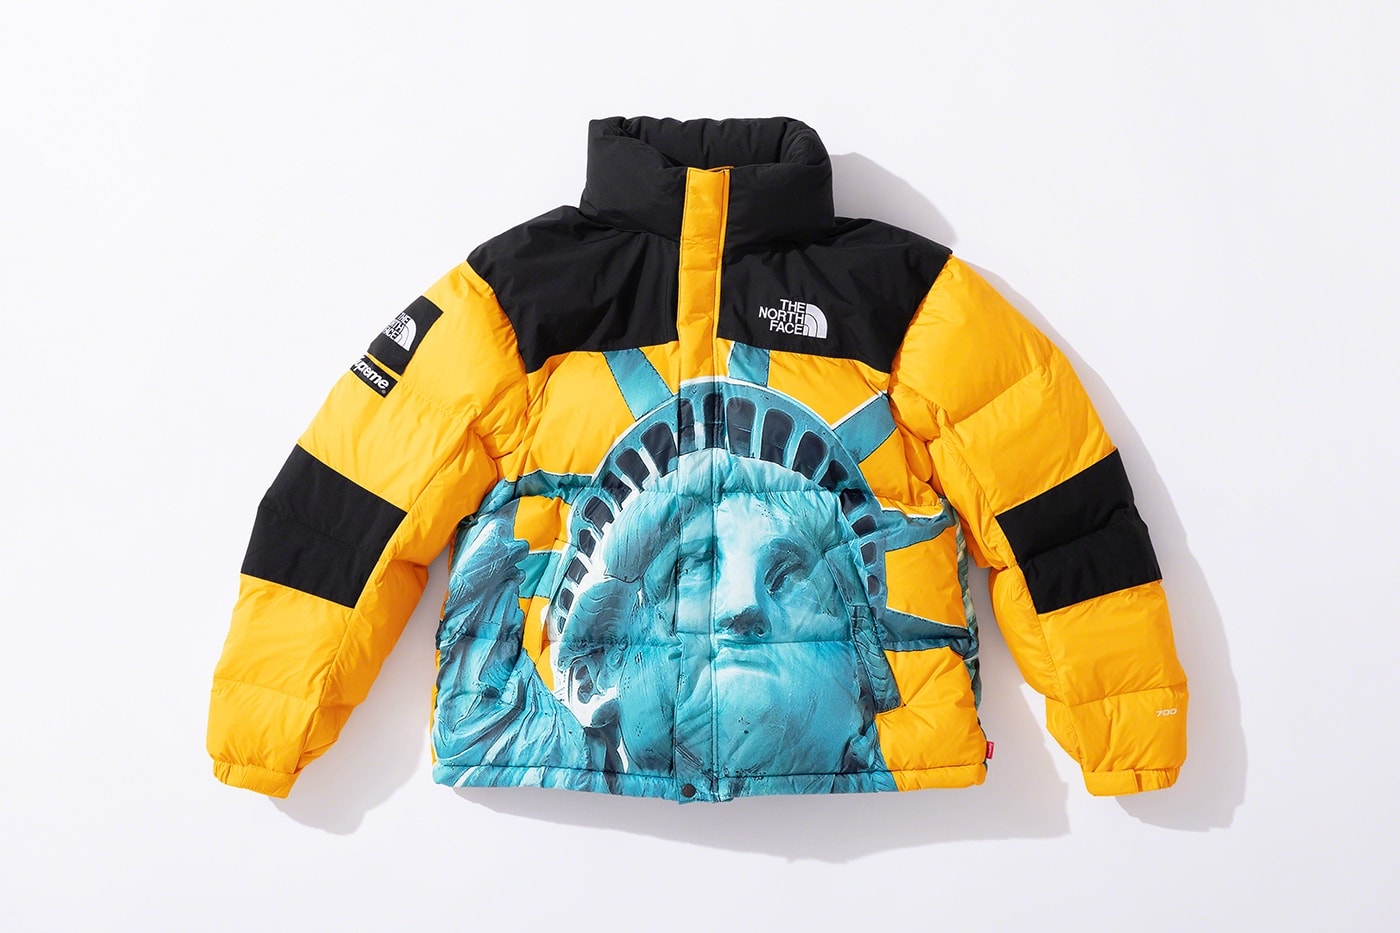 Supreme x The North Face Fall/Winter 2019 Collection